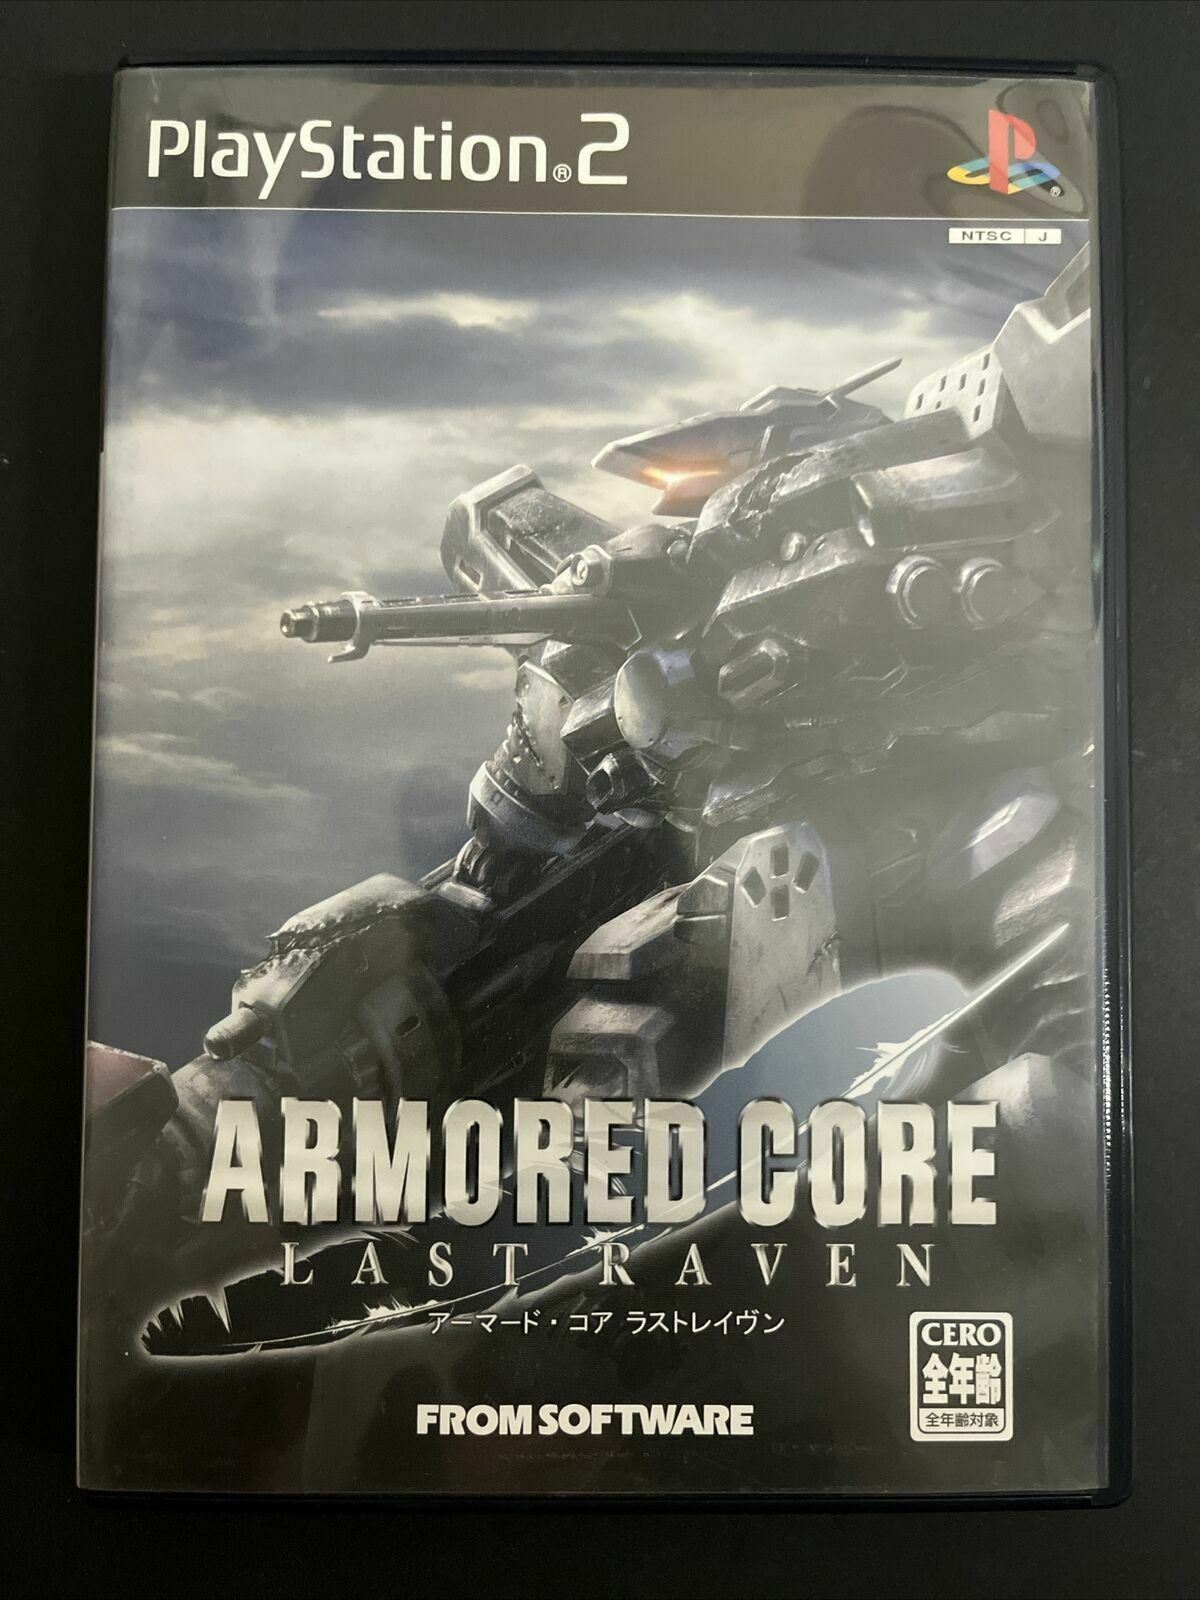 Armored Core: Last Raven - PlayStation PS2 NTSC-J JAPAN Game Complete w Manual